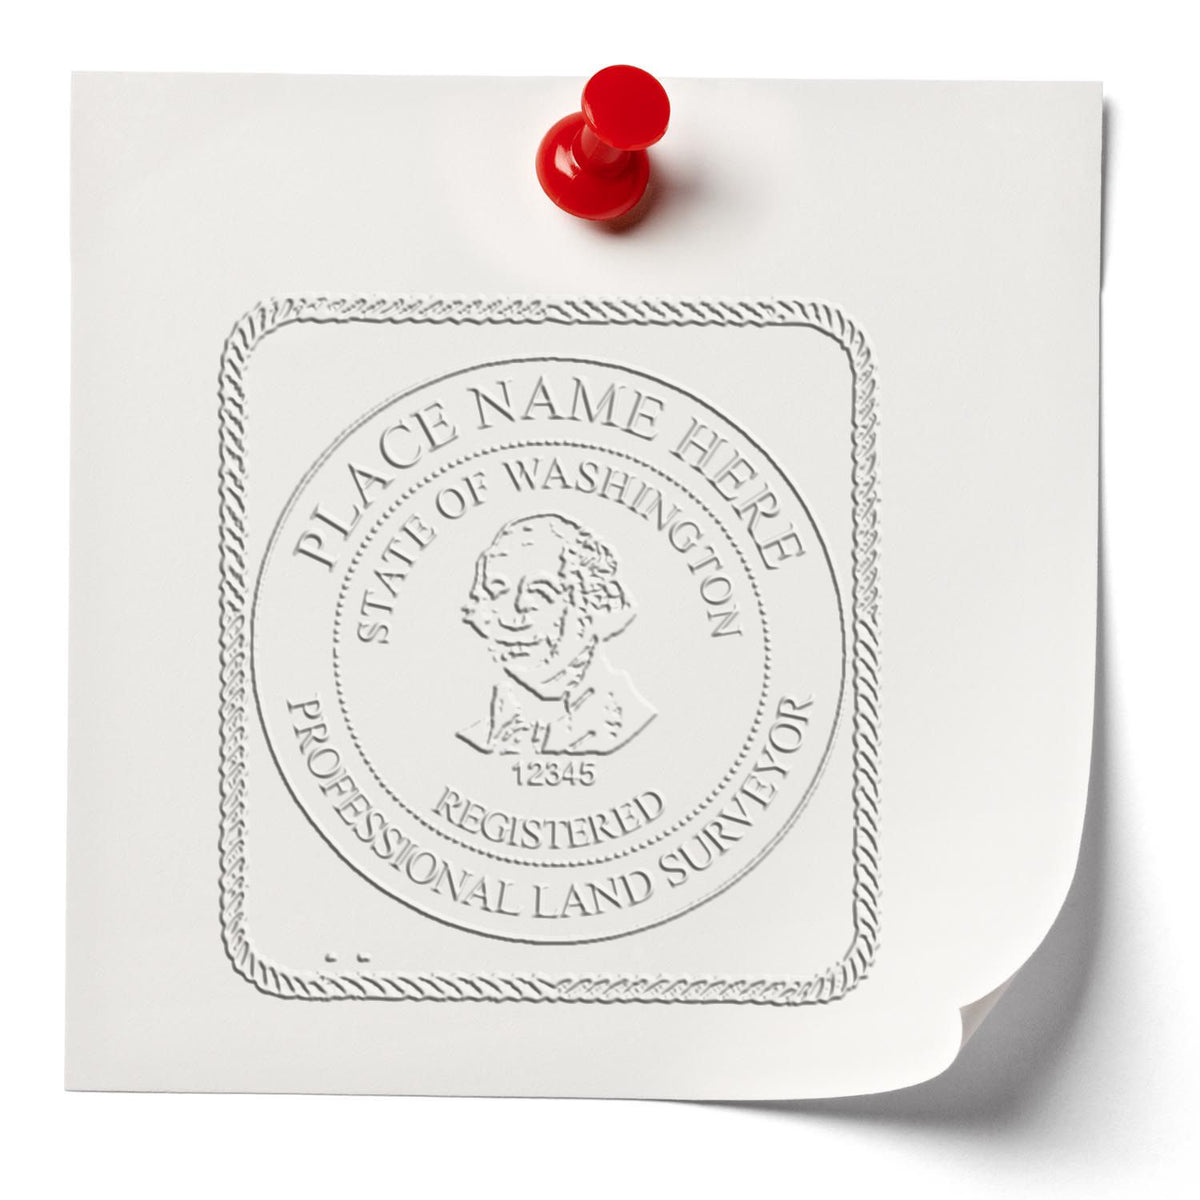 A stamped imprint of the Gift Washington Land Surveyor Seal in this stylish lifestyle photo, setting the tone for a unique and personalized product.